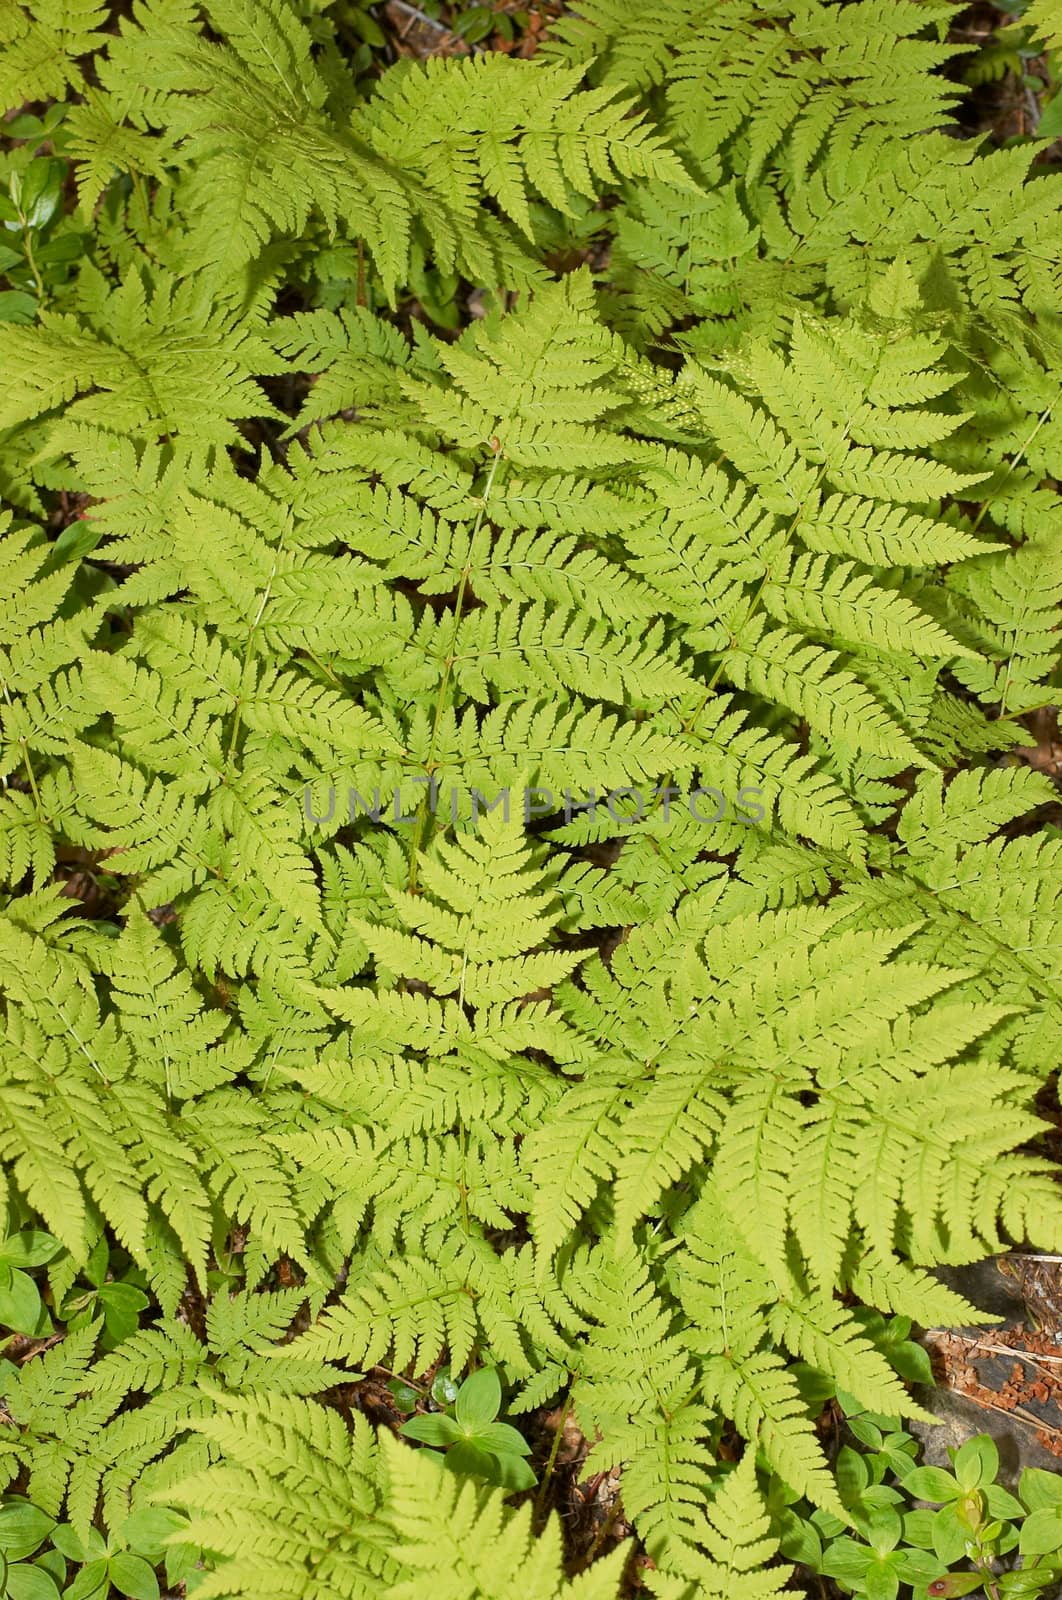 The texture representing green leaves of a fern